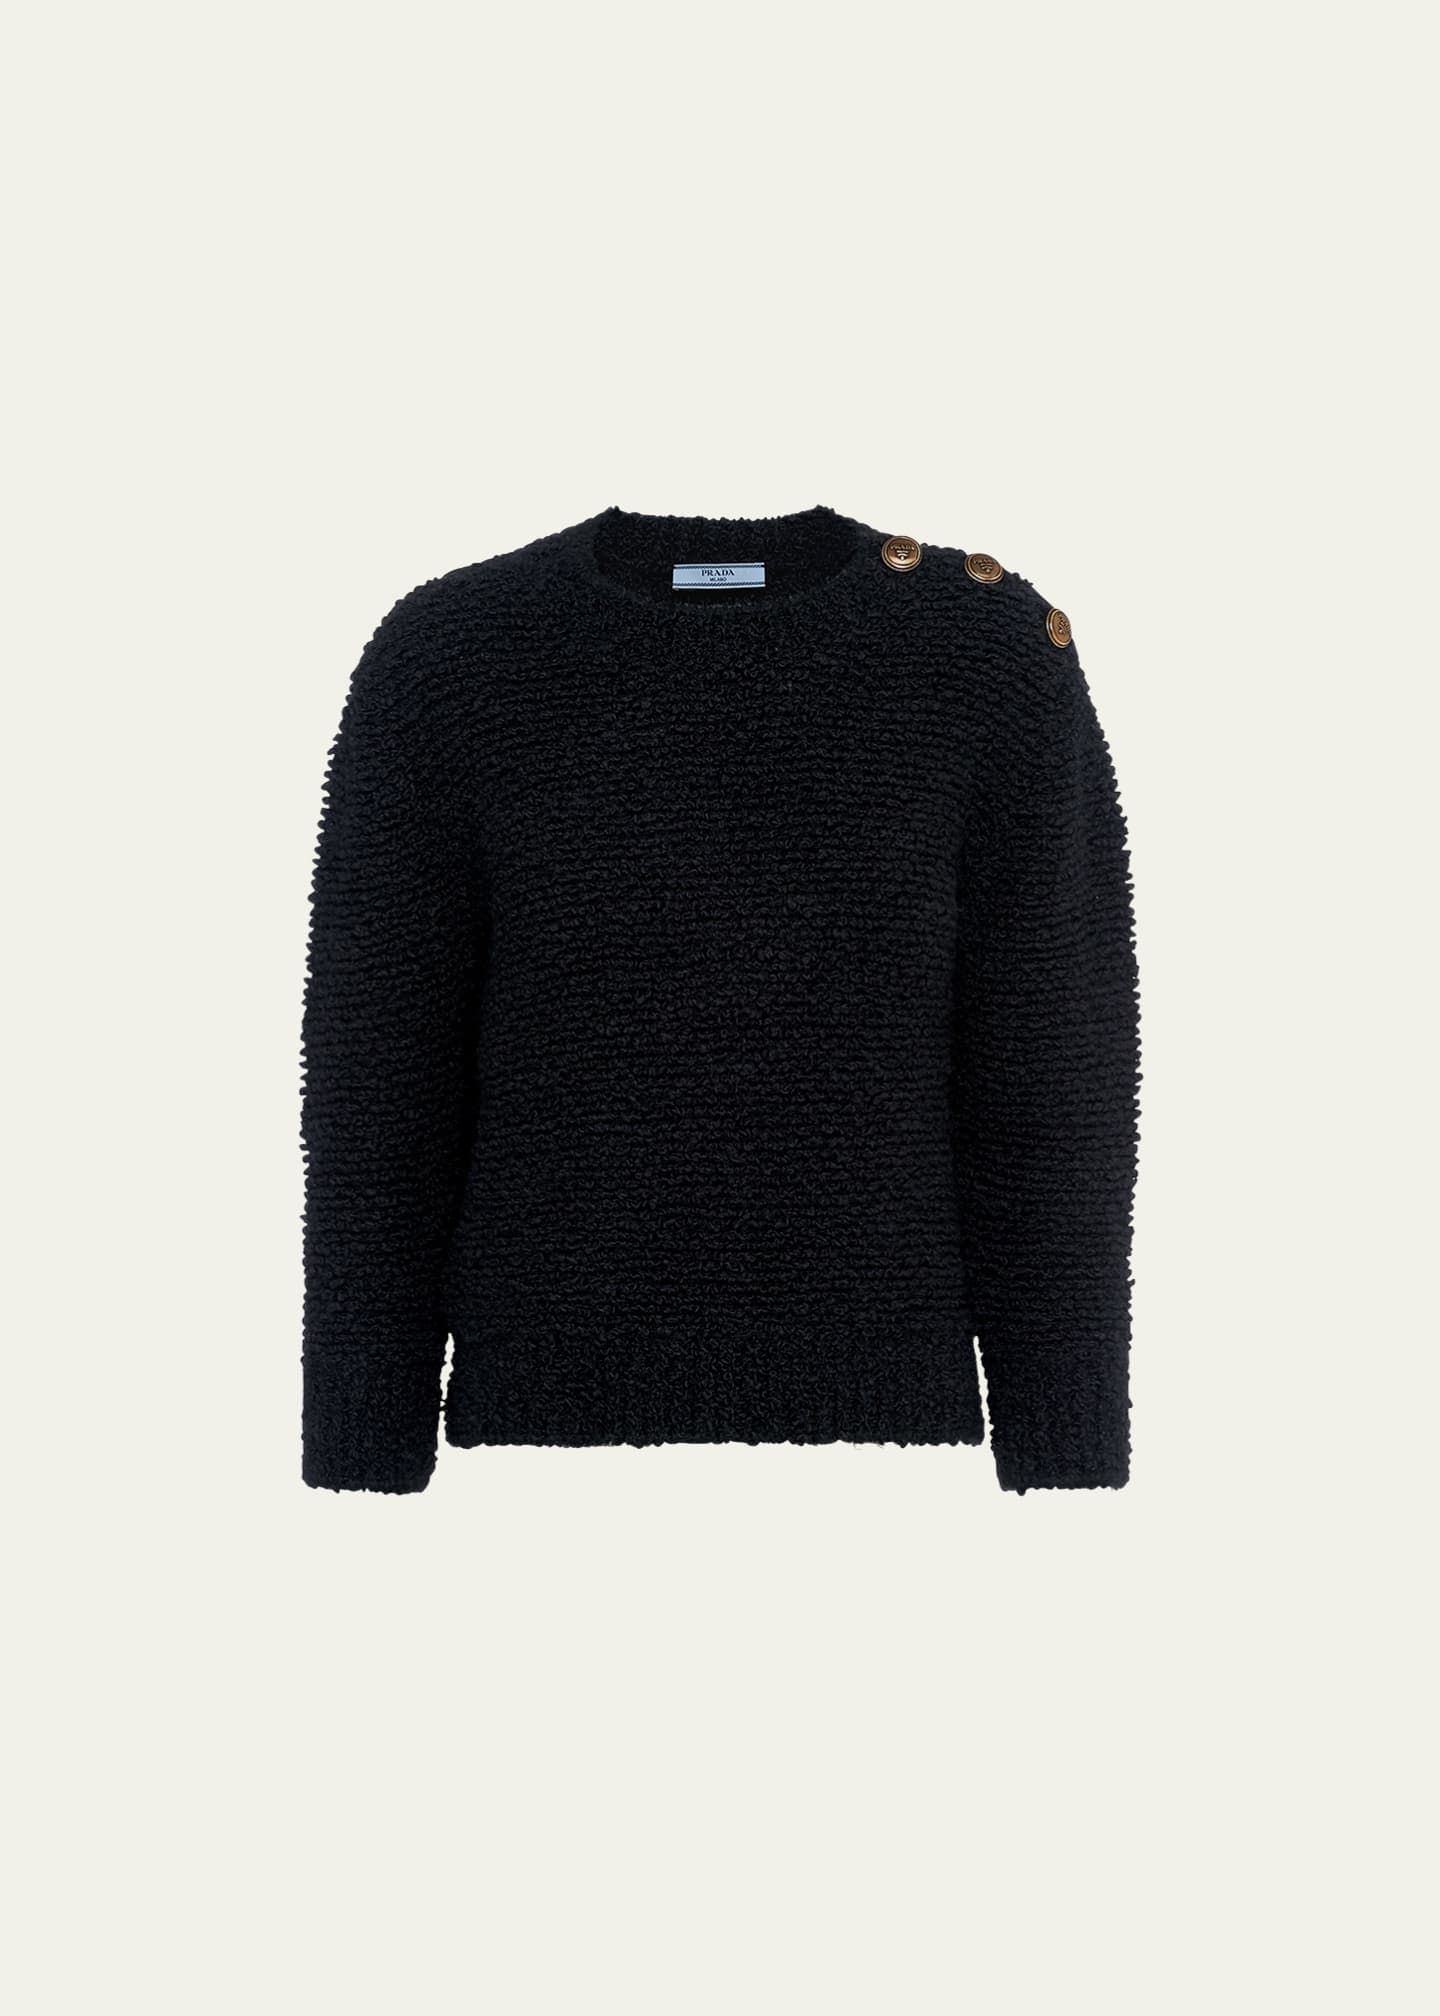 Prada Wool Boucle Knit Sweater with Shoulder Buttons - Bergdorf